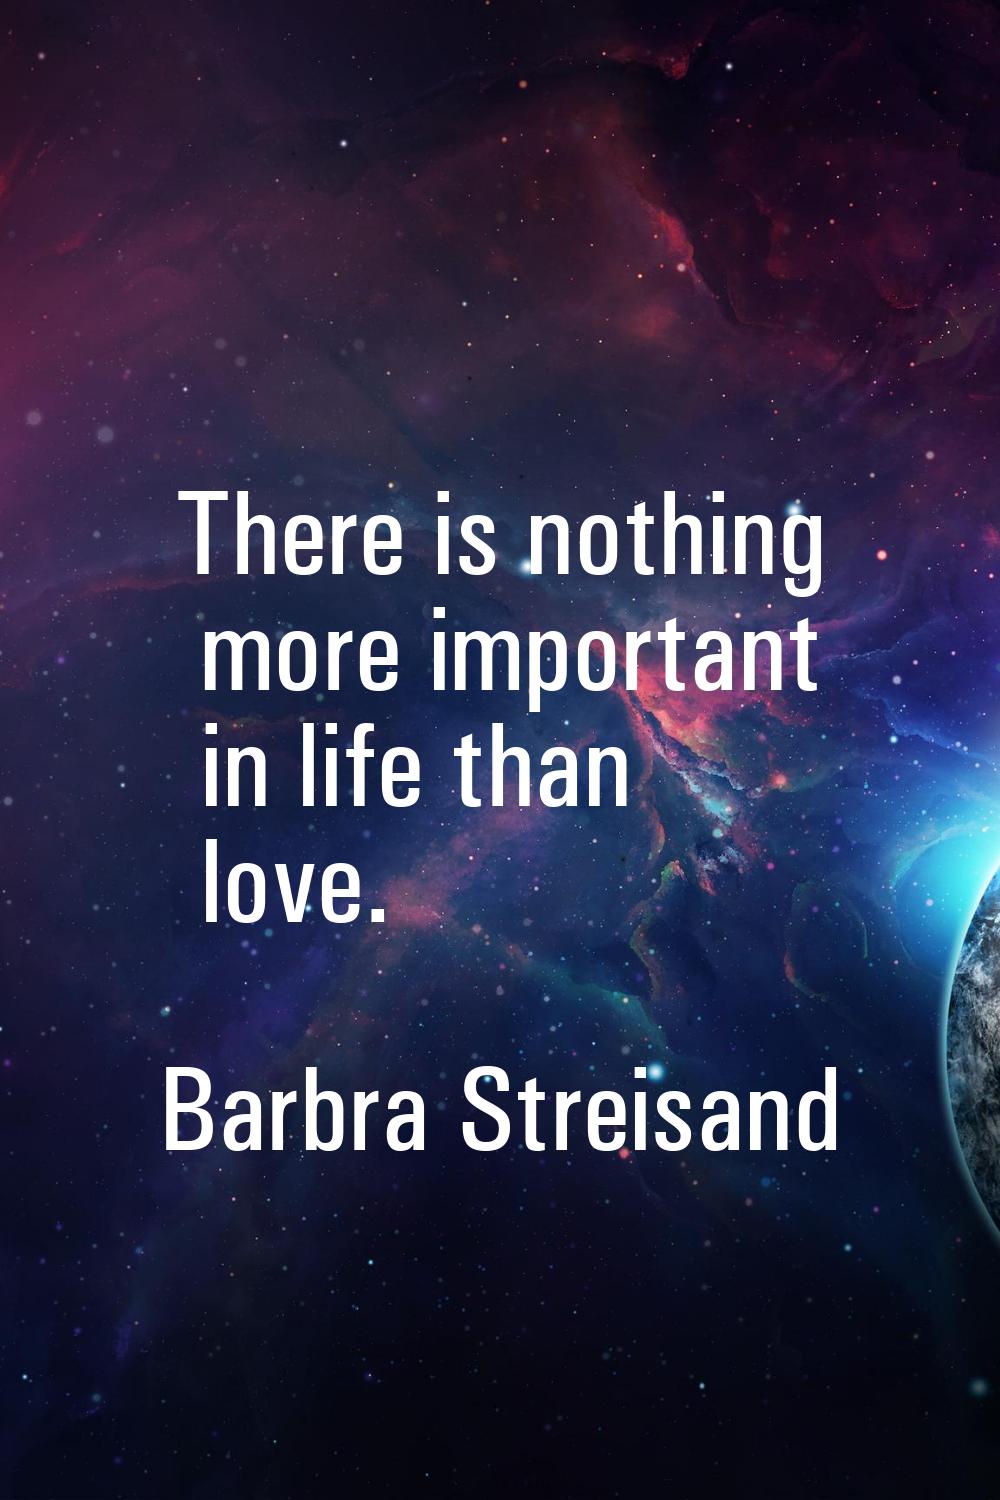 There is nothing more important in life than love.